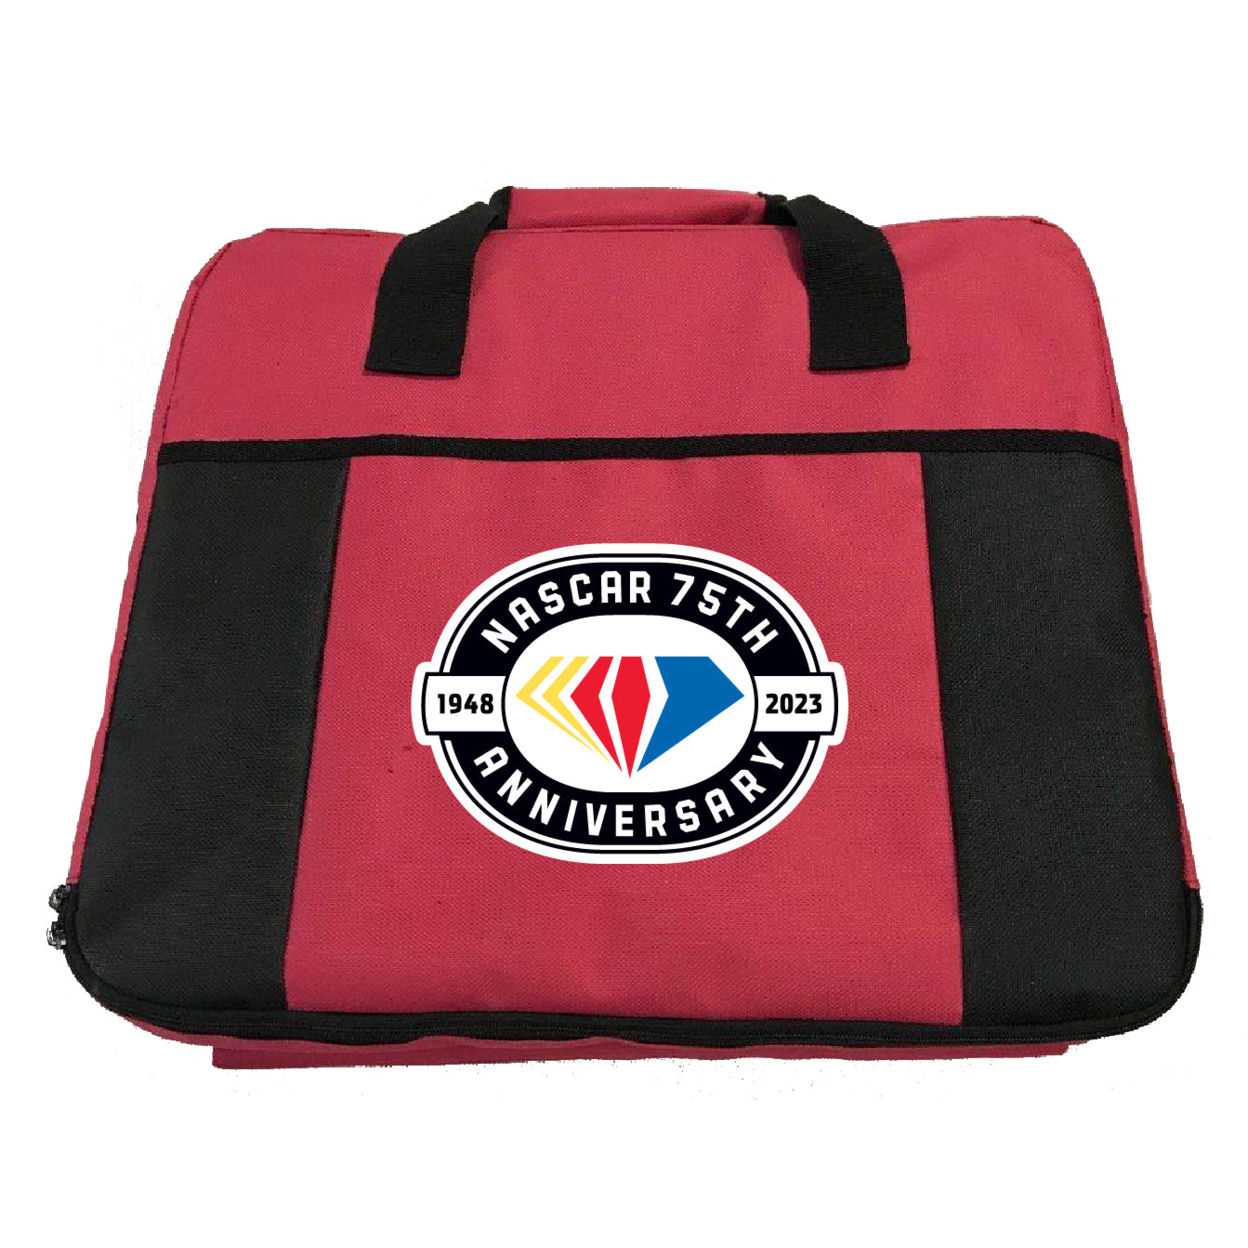 NASCAR 75 Year Anniversary Officially Licensed Deluxe Seat Cushion - Red